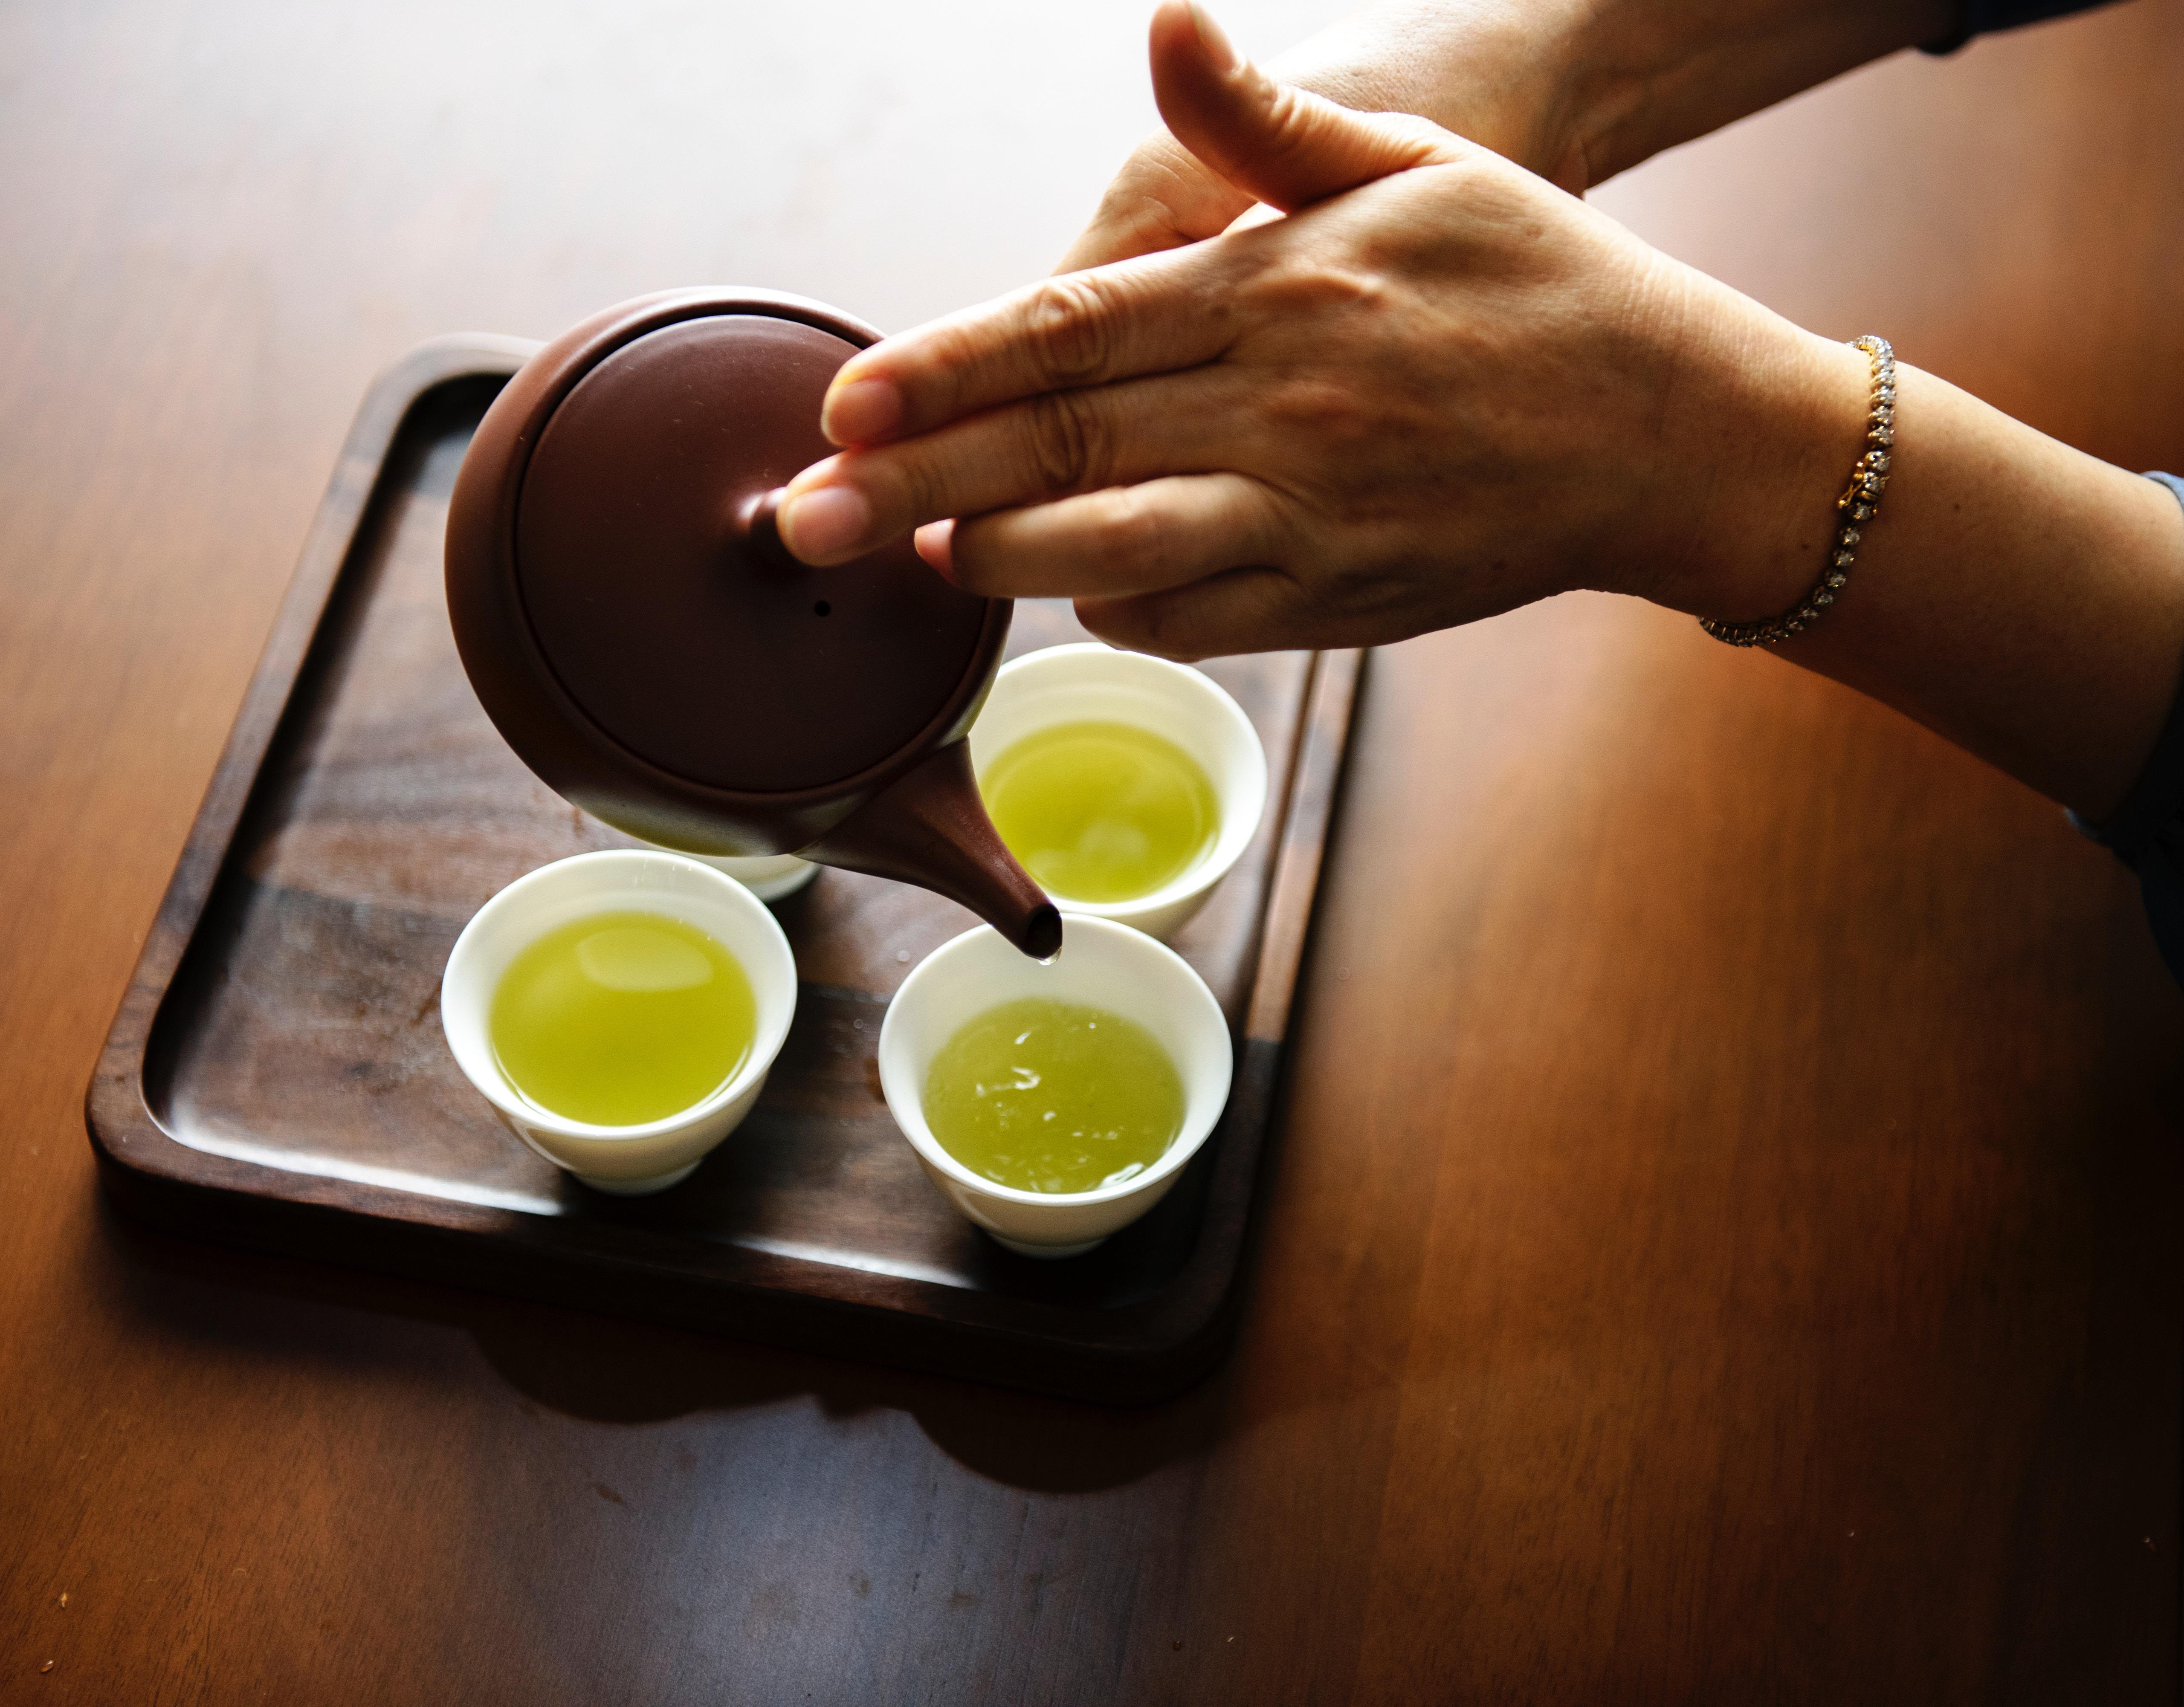 Tea Ceremony is the origin of the value of Omotenashi. The meticulous assembly and execution of the ceremony gave birth to a culture's identity.